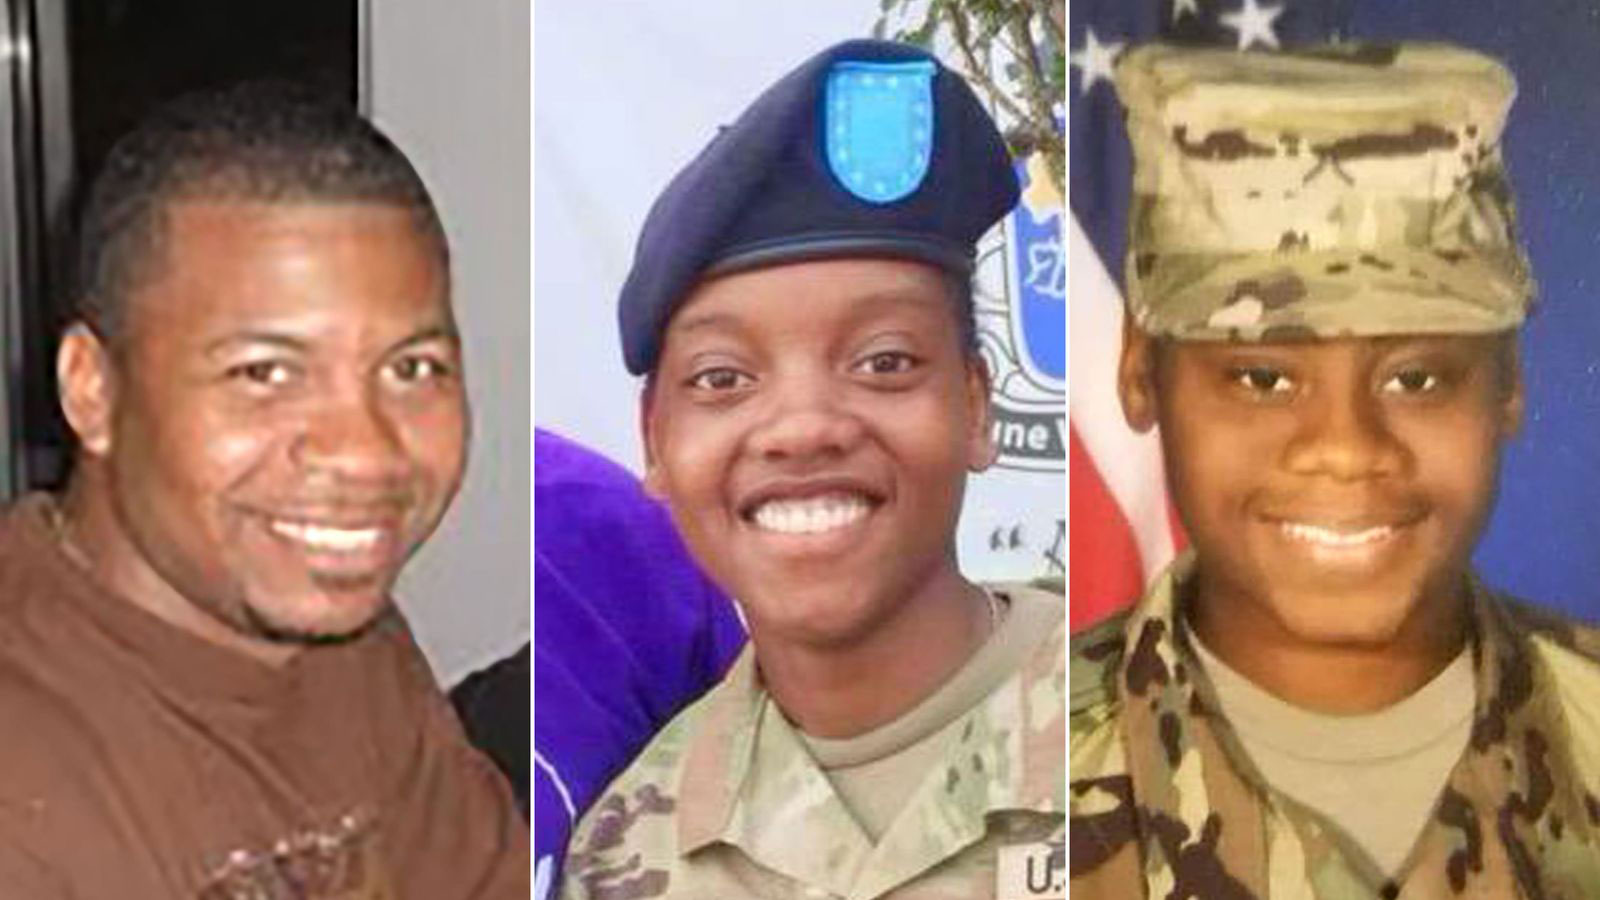 These undated photos from the US Army Reserve Command show Sgt. William Jerome Rivers, 46, Spc. Kennedy Ladon Sanders, 24, and Spc. Breonna Alexsondria Moffett, 23.